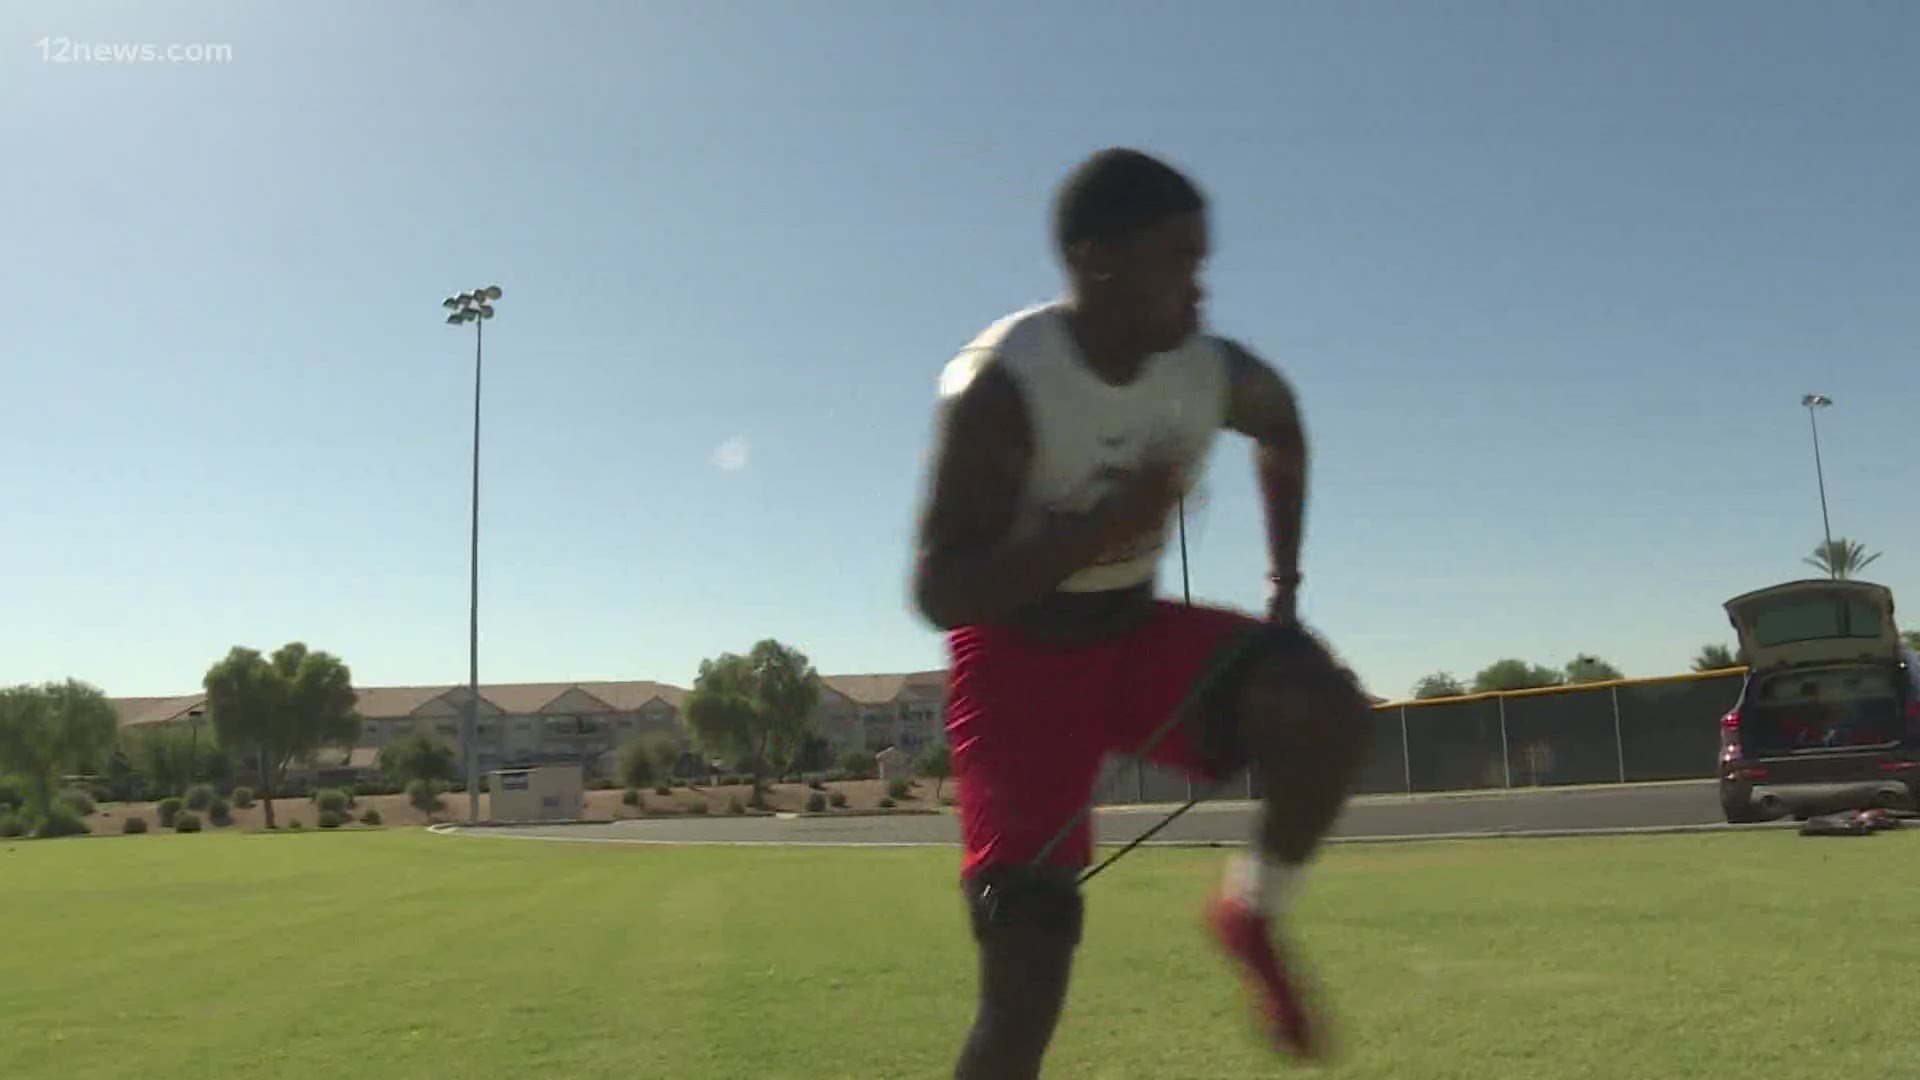 The AIA hasn't made a decision on whether there will be a HS football season this fall. But one running back at Brophy sees the season as a way to earn a scholarship